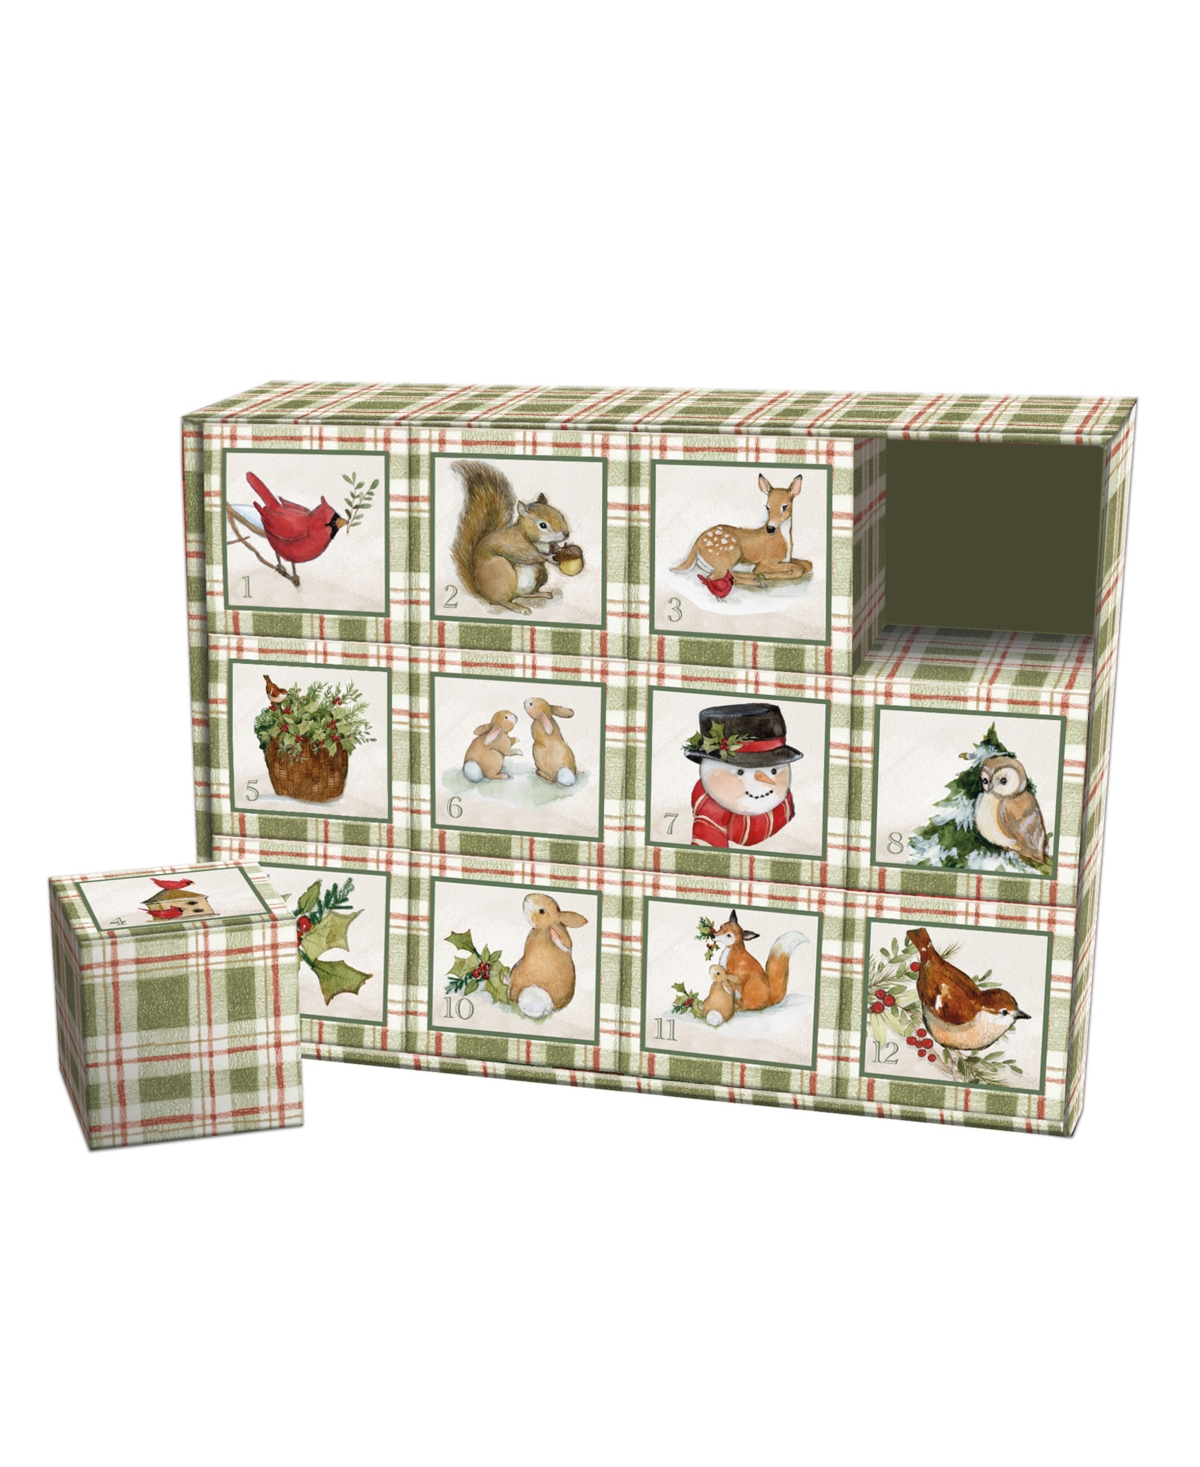 Lang Wood Land Snowman Advent Calendar Puzzle In Multi